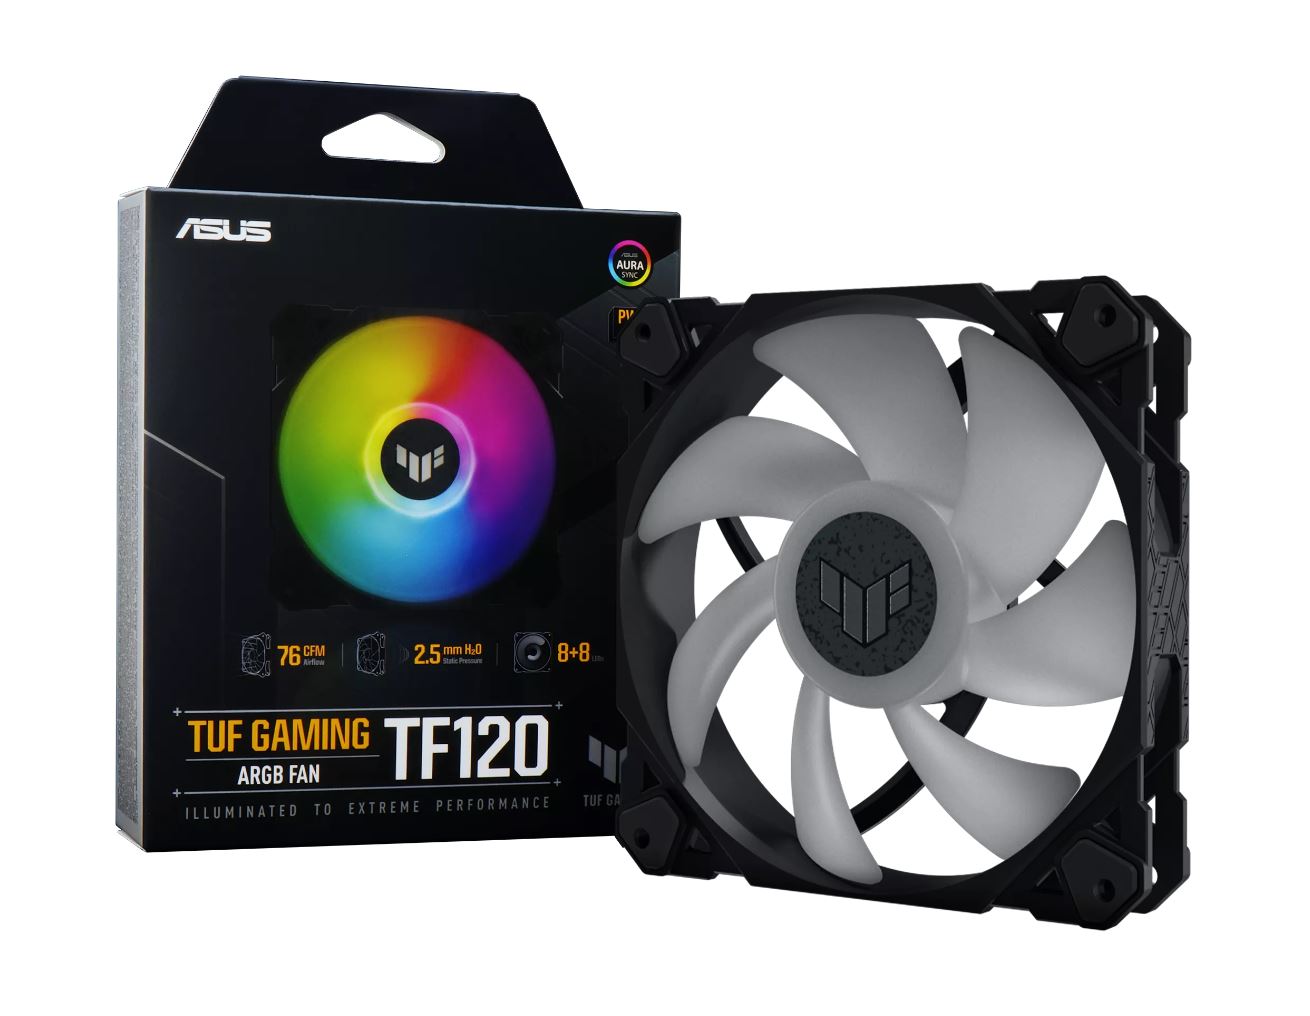 Case Accessories/ASUS: ASUS, TUF, Gaming, TF120, ARGB, Fan., Low, Noise., PWN, Control, Anti-vibration., Double-layer, LED, arra, .Aura, Sync., 250, 000, hours, 